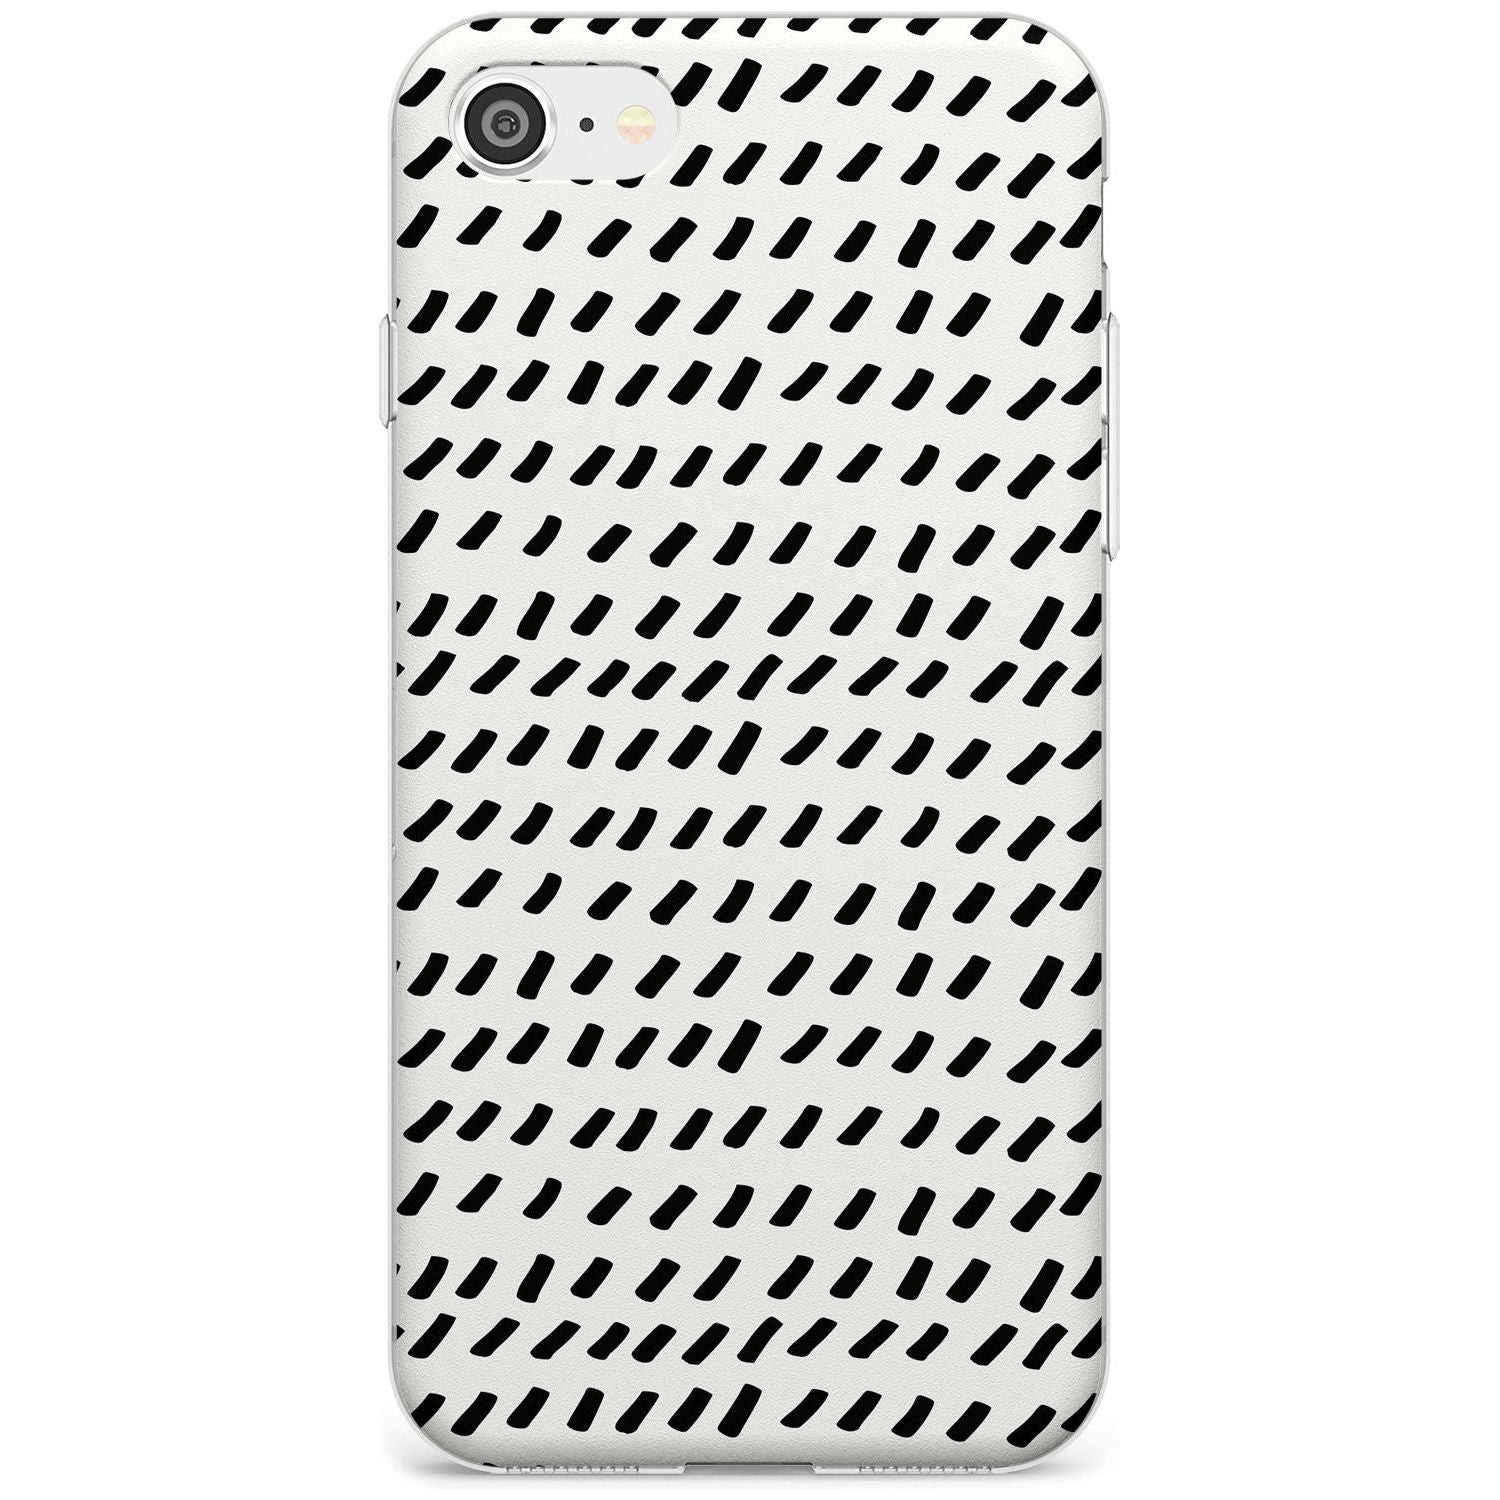 Hand Drawn Lines Pattern Slim TPU Phone Case for iPhone SE 8 7 Plus